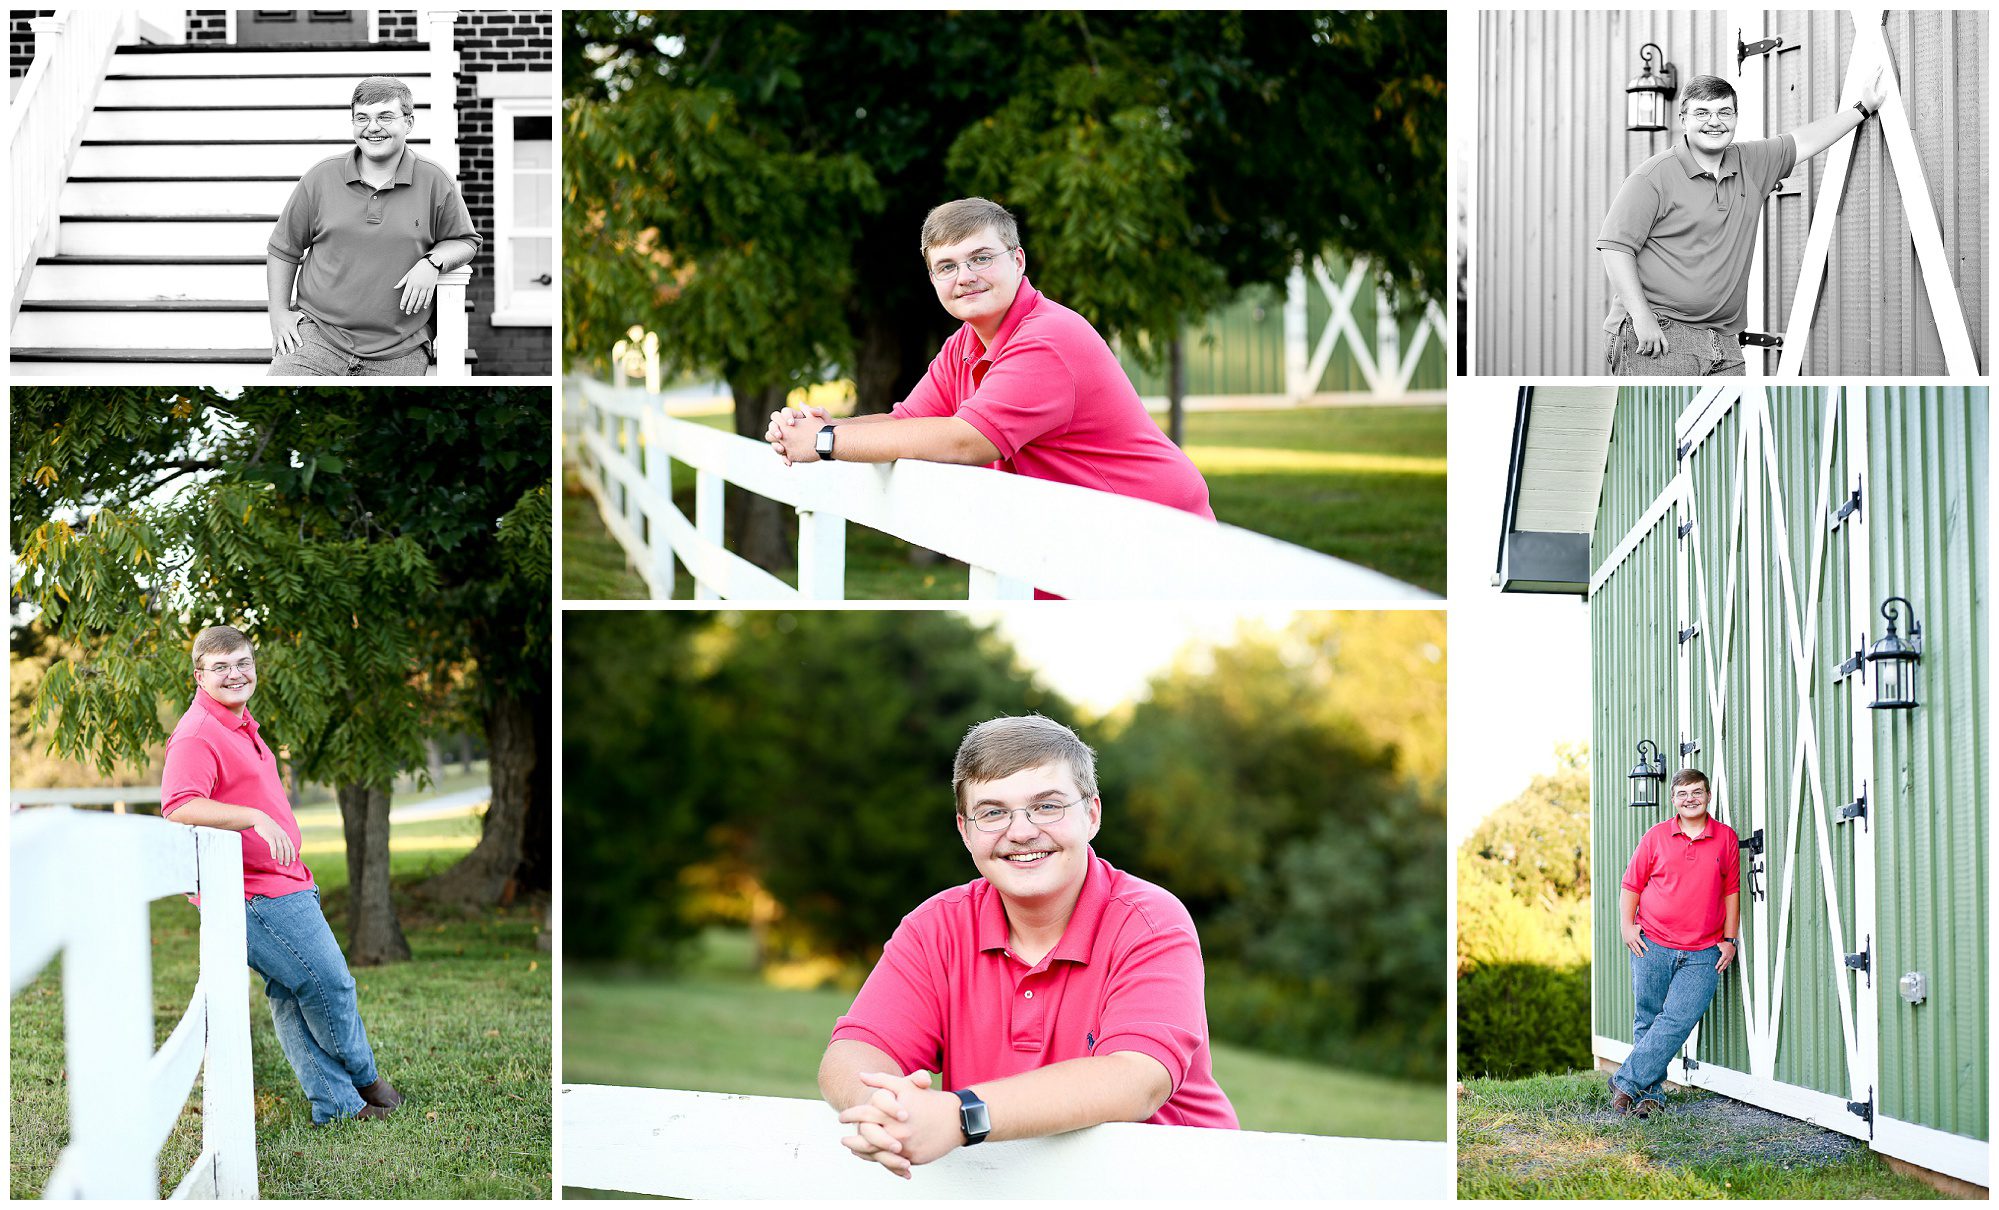 Monticello High School Senior Portraits Pickup Truck Fluvanna Charlottesville cville photographer pictures class of 2020 Ford F250 Teen Boy Country